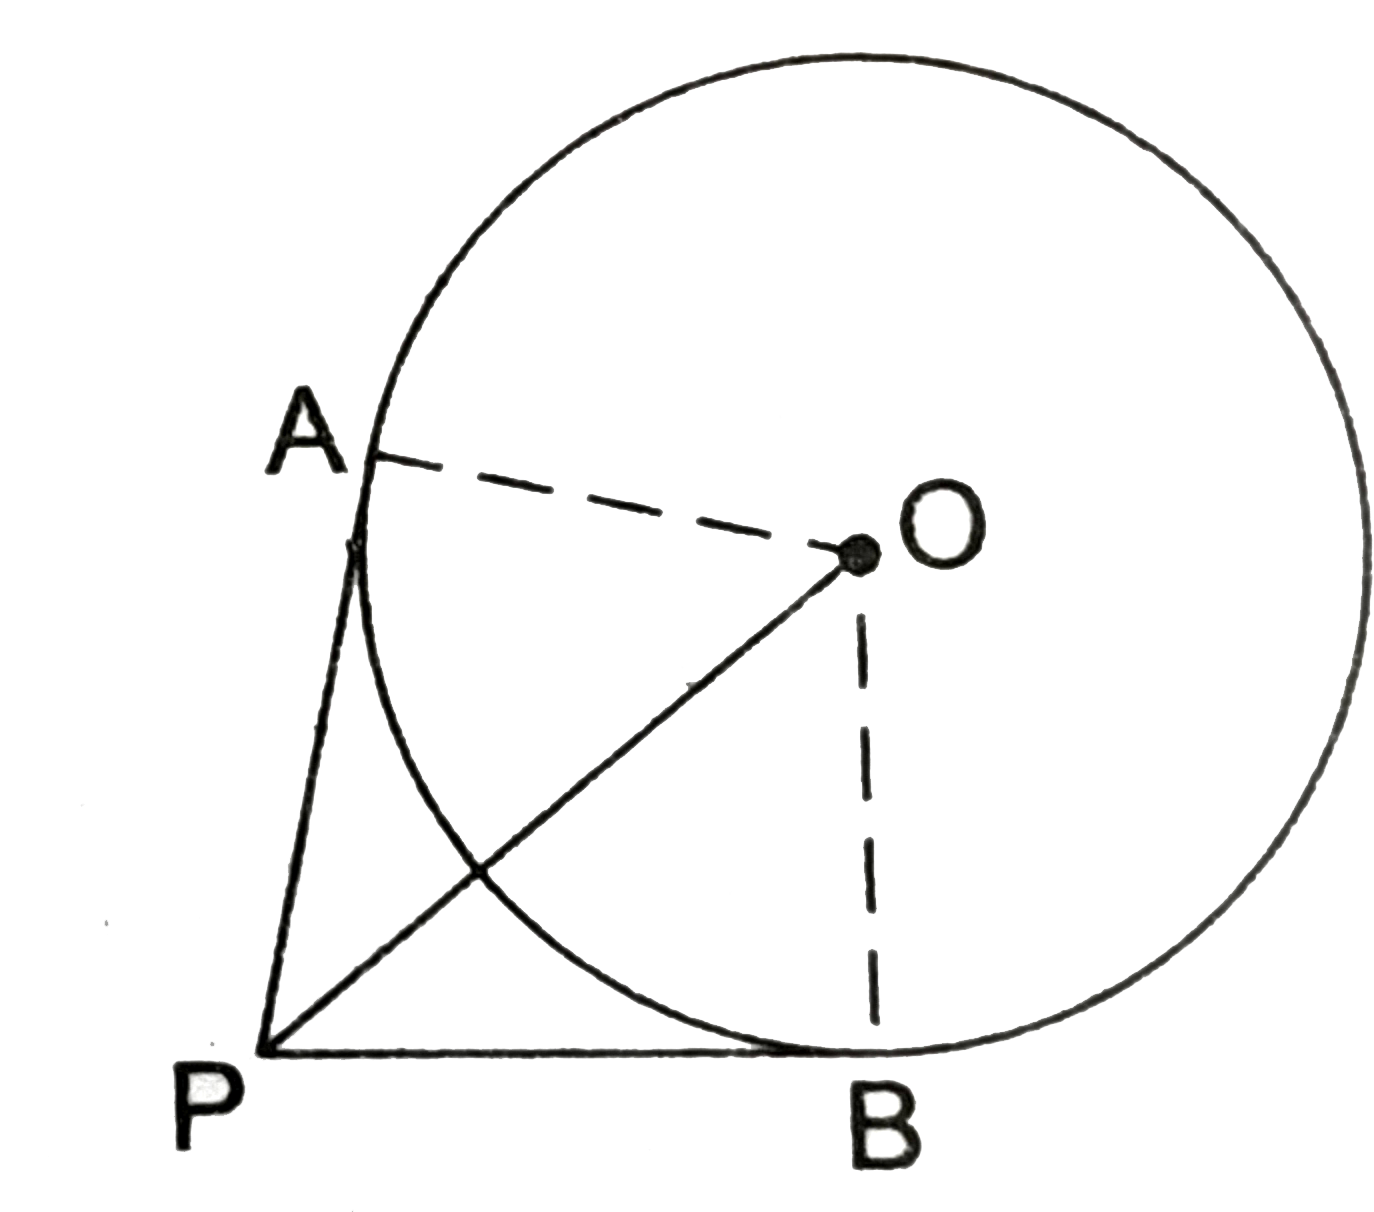 If tangents PA and PB from a point P to circle with centre O drawn so that /APB=80^(@) then /POA=?